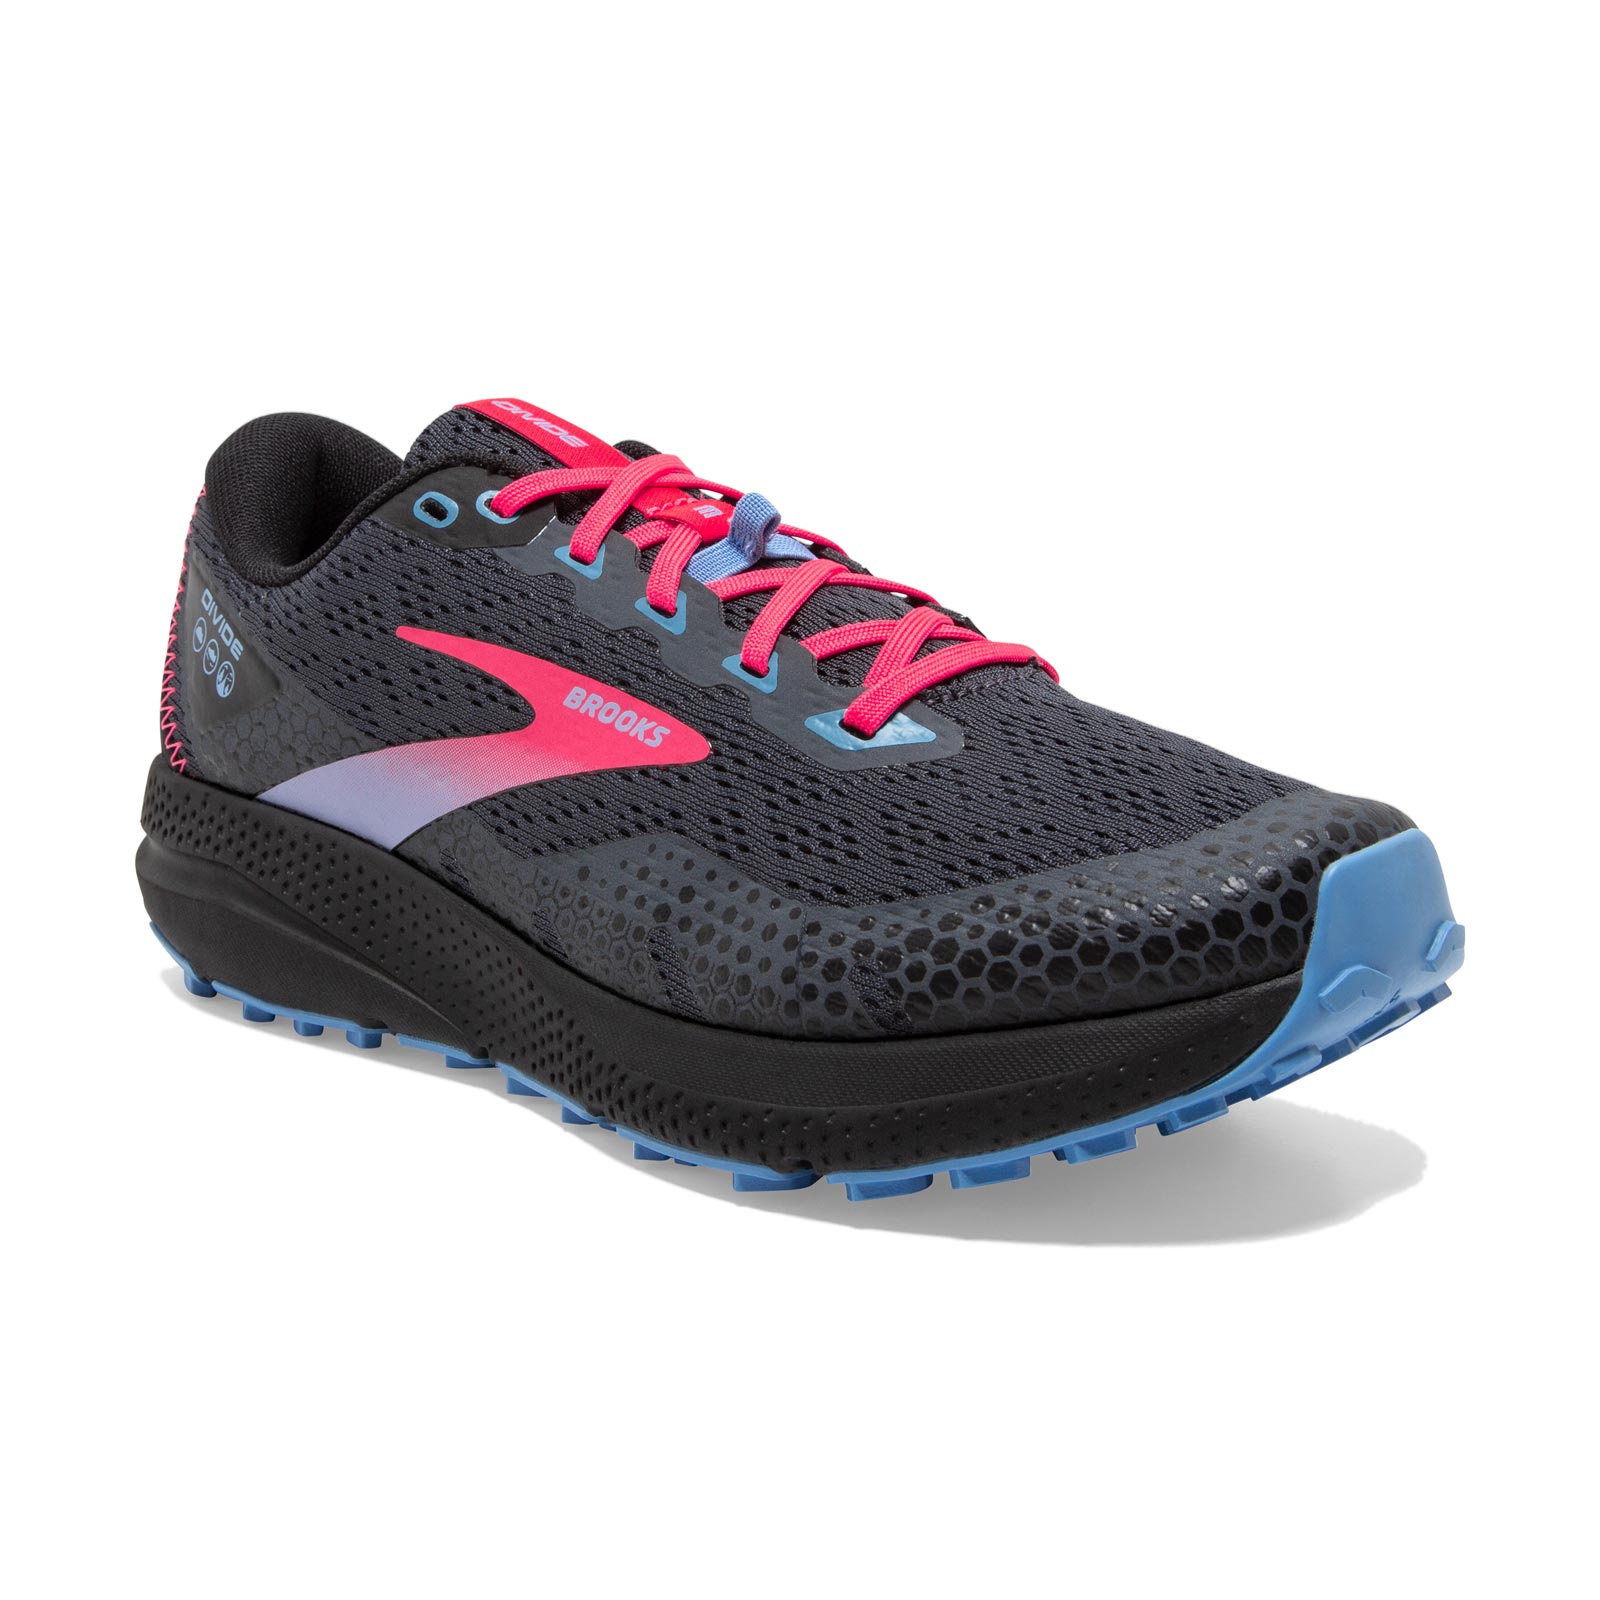 BROOKS DIVIDE 3 WOMENS WALKING TRAIL SHOES